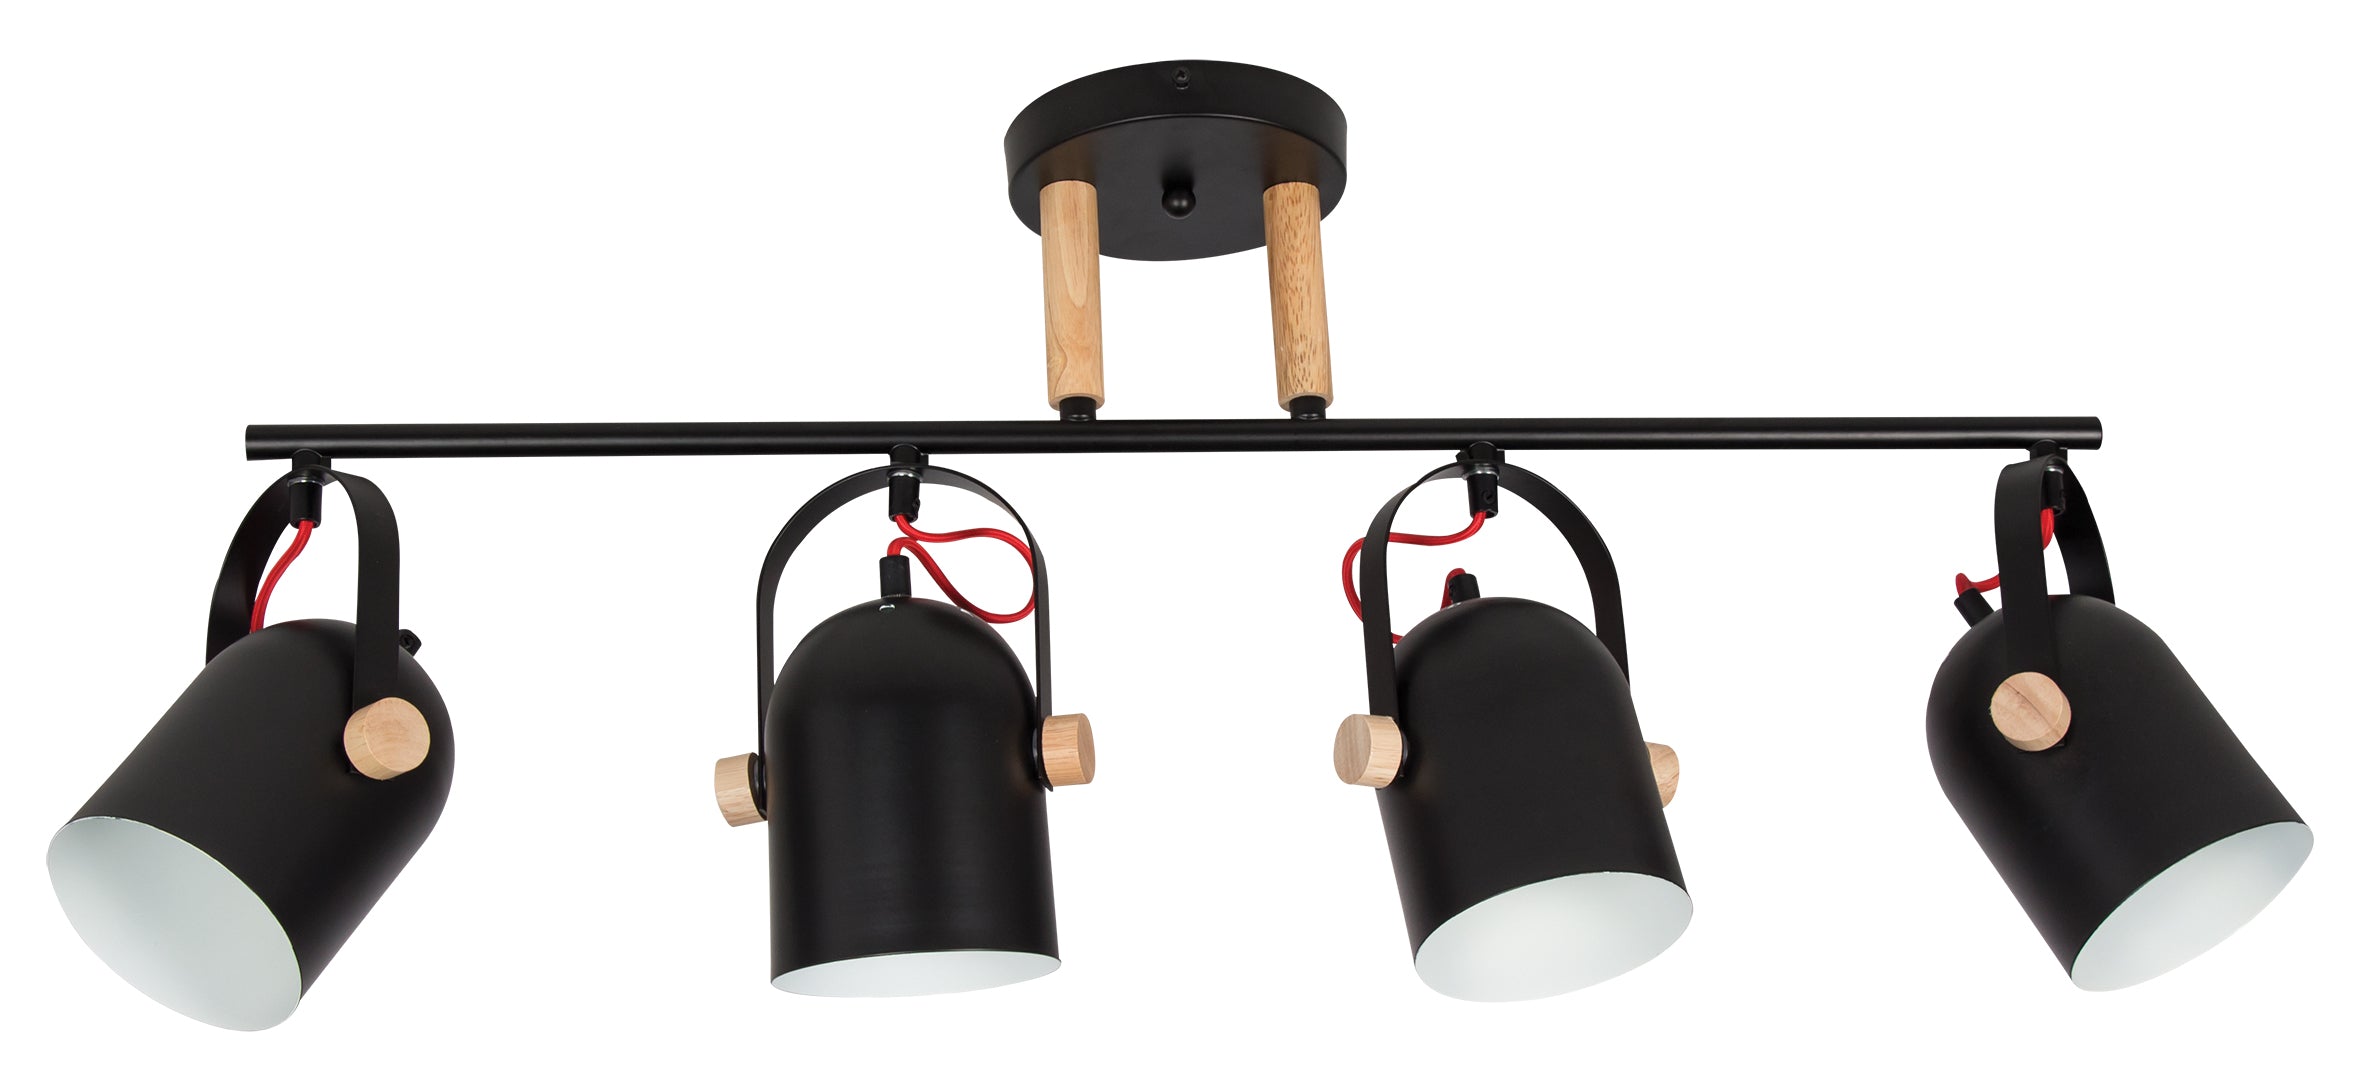 4 Light Black & Wood Ceiling Spotlight (Launch Special) - Future Light - LED Lights South Africa